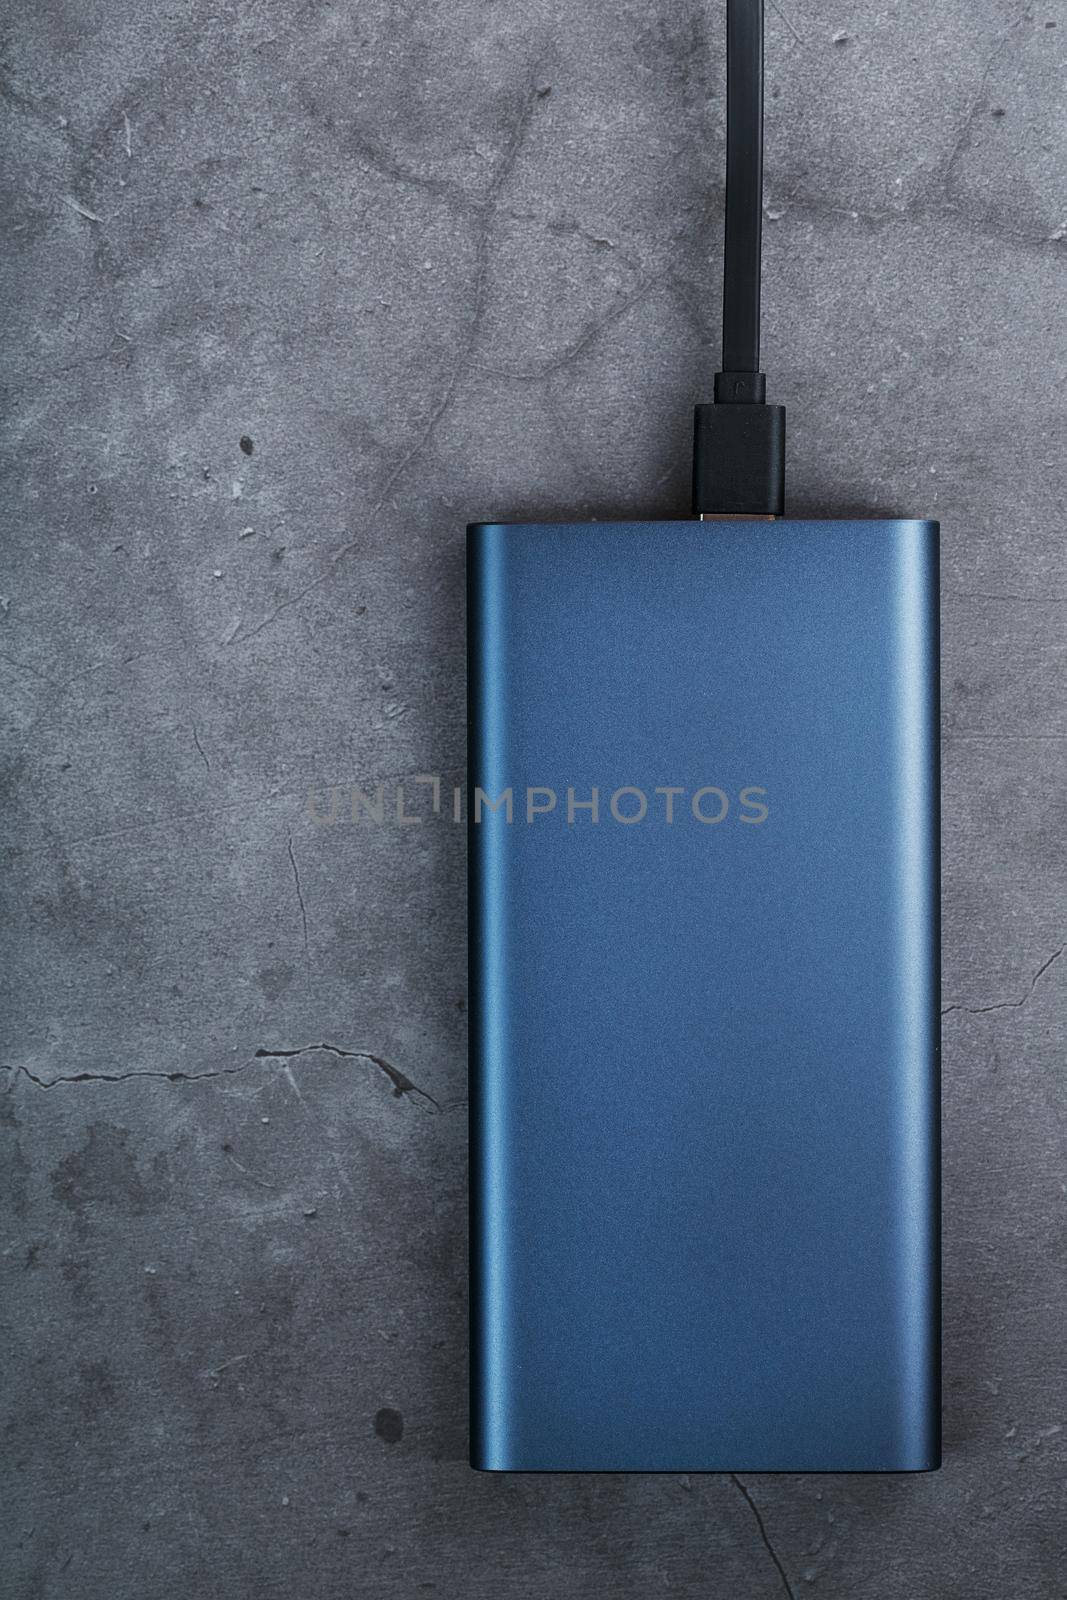 Battery Power supply for recharging gadgets and electronic devices on a dark background